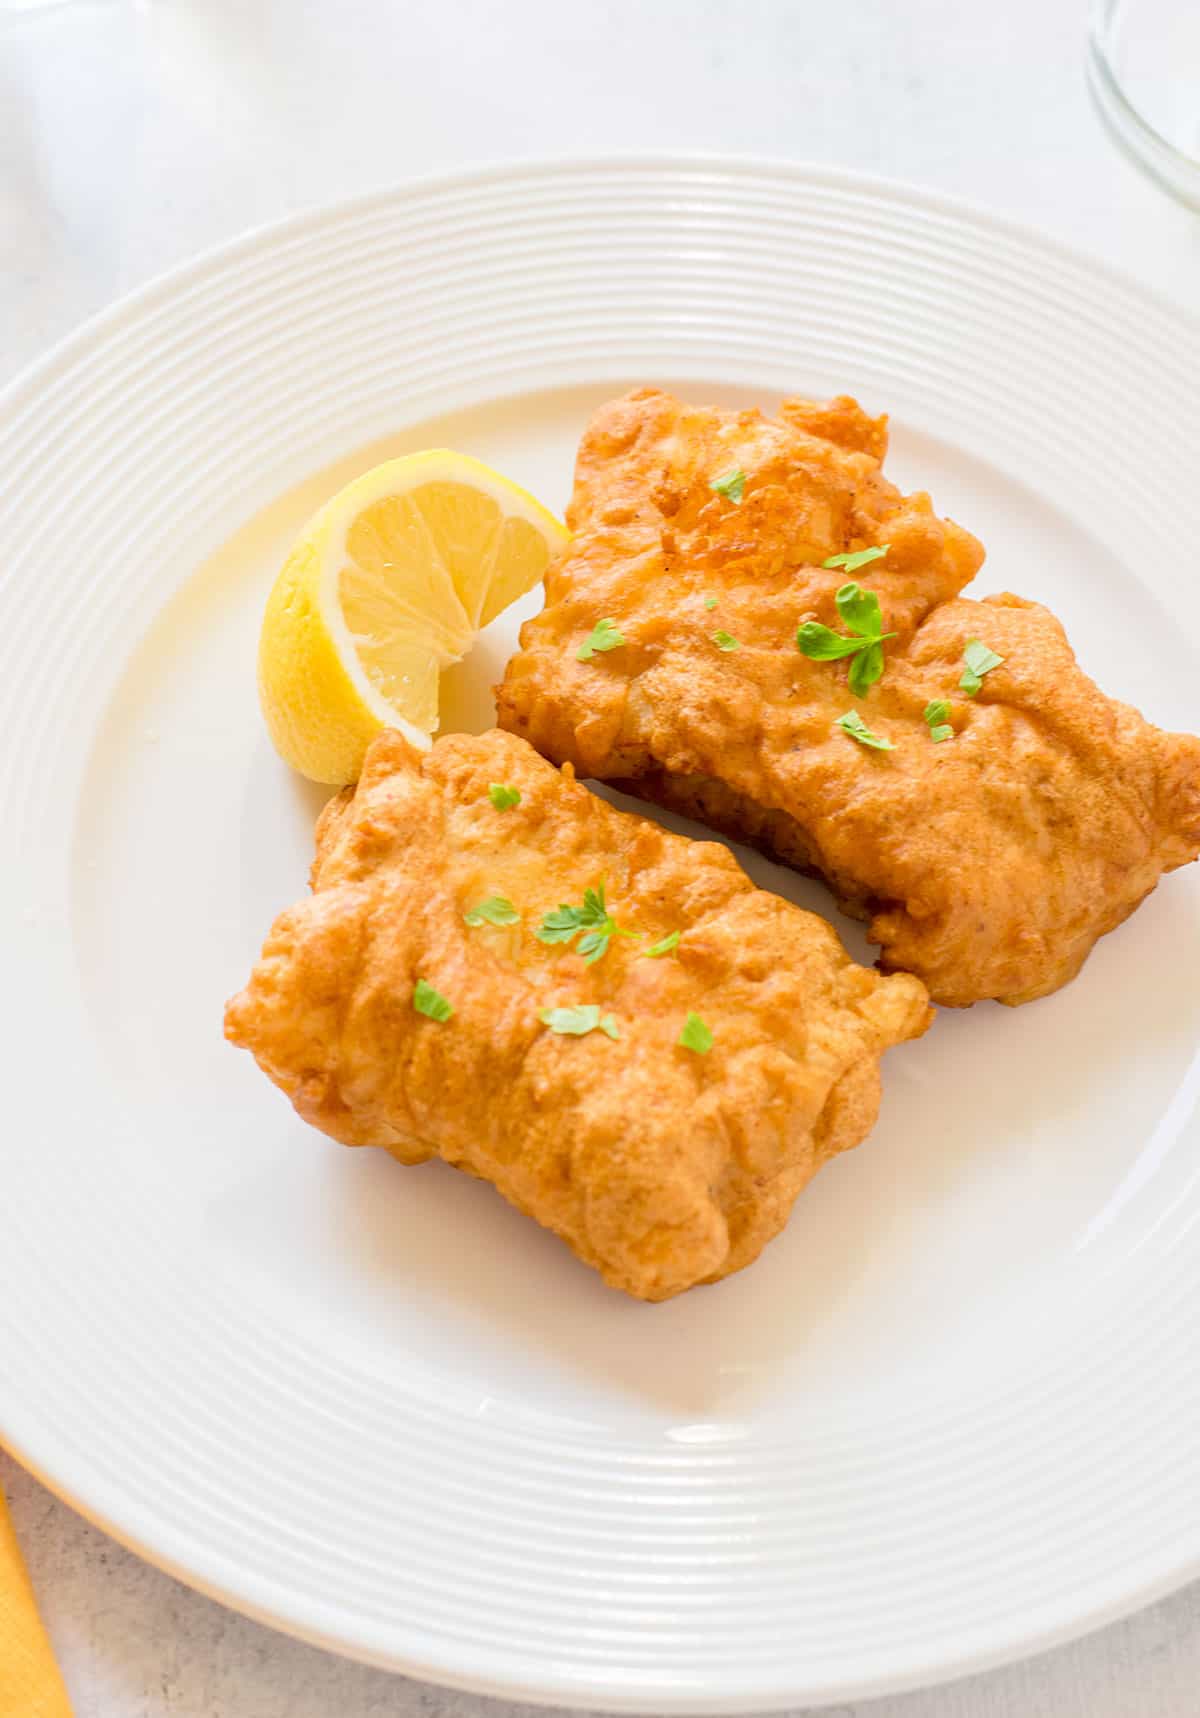 two pieces of deep fried fish on plate with lemon